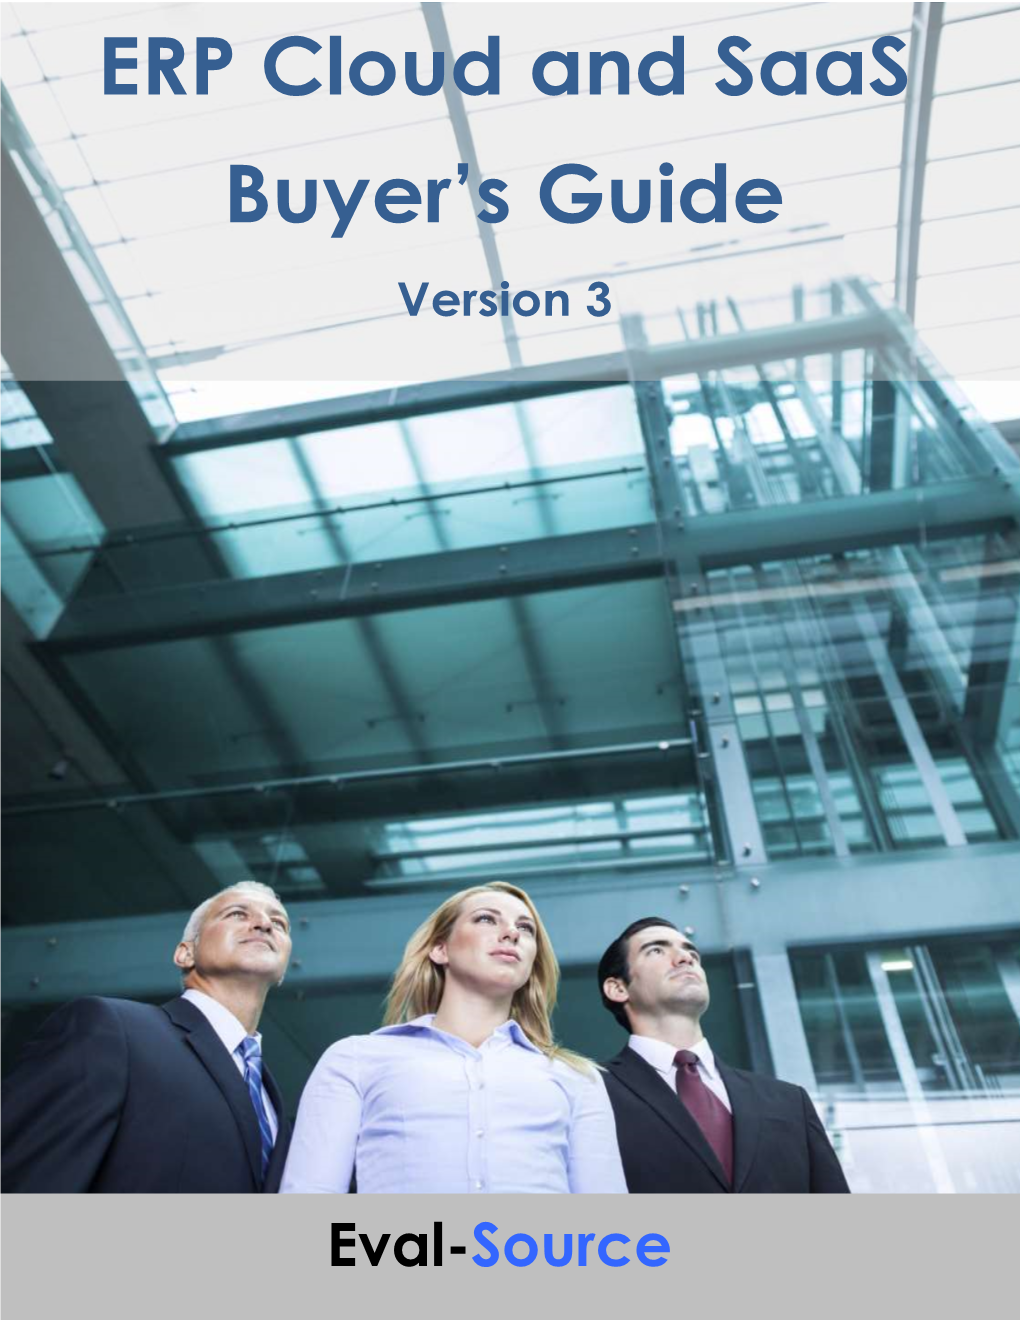 ERP Cloud and Saas Buyer's Guide